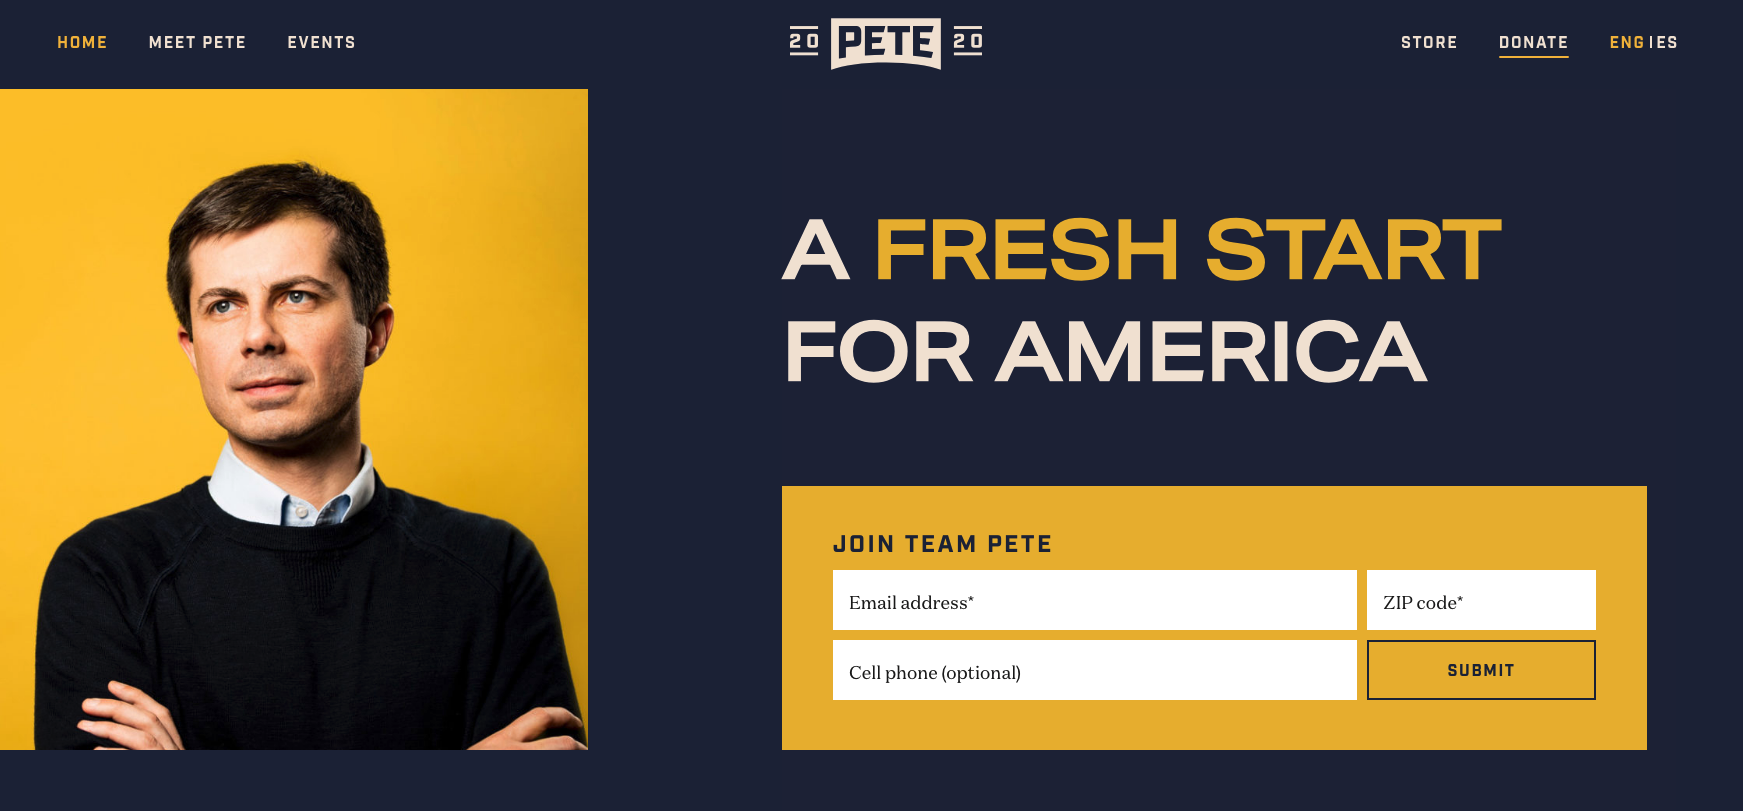 Best and Worst 2020 Democratic Presidential Candidate Websites1743 x 811